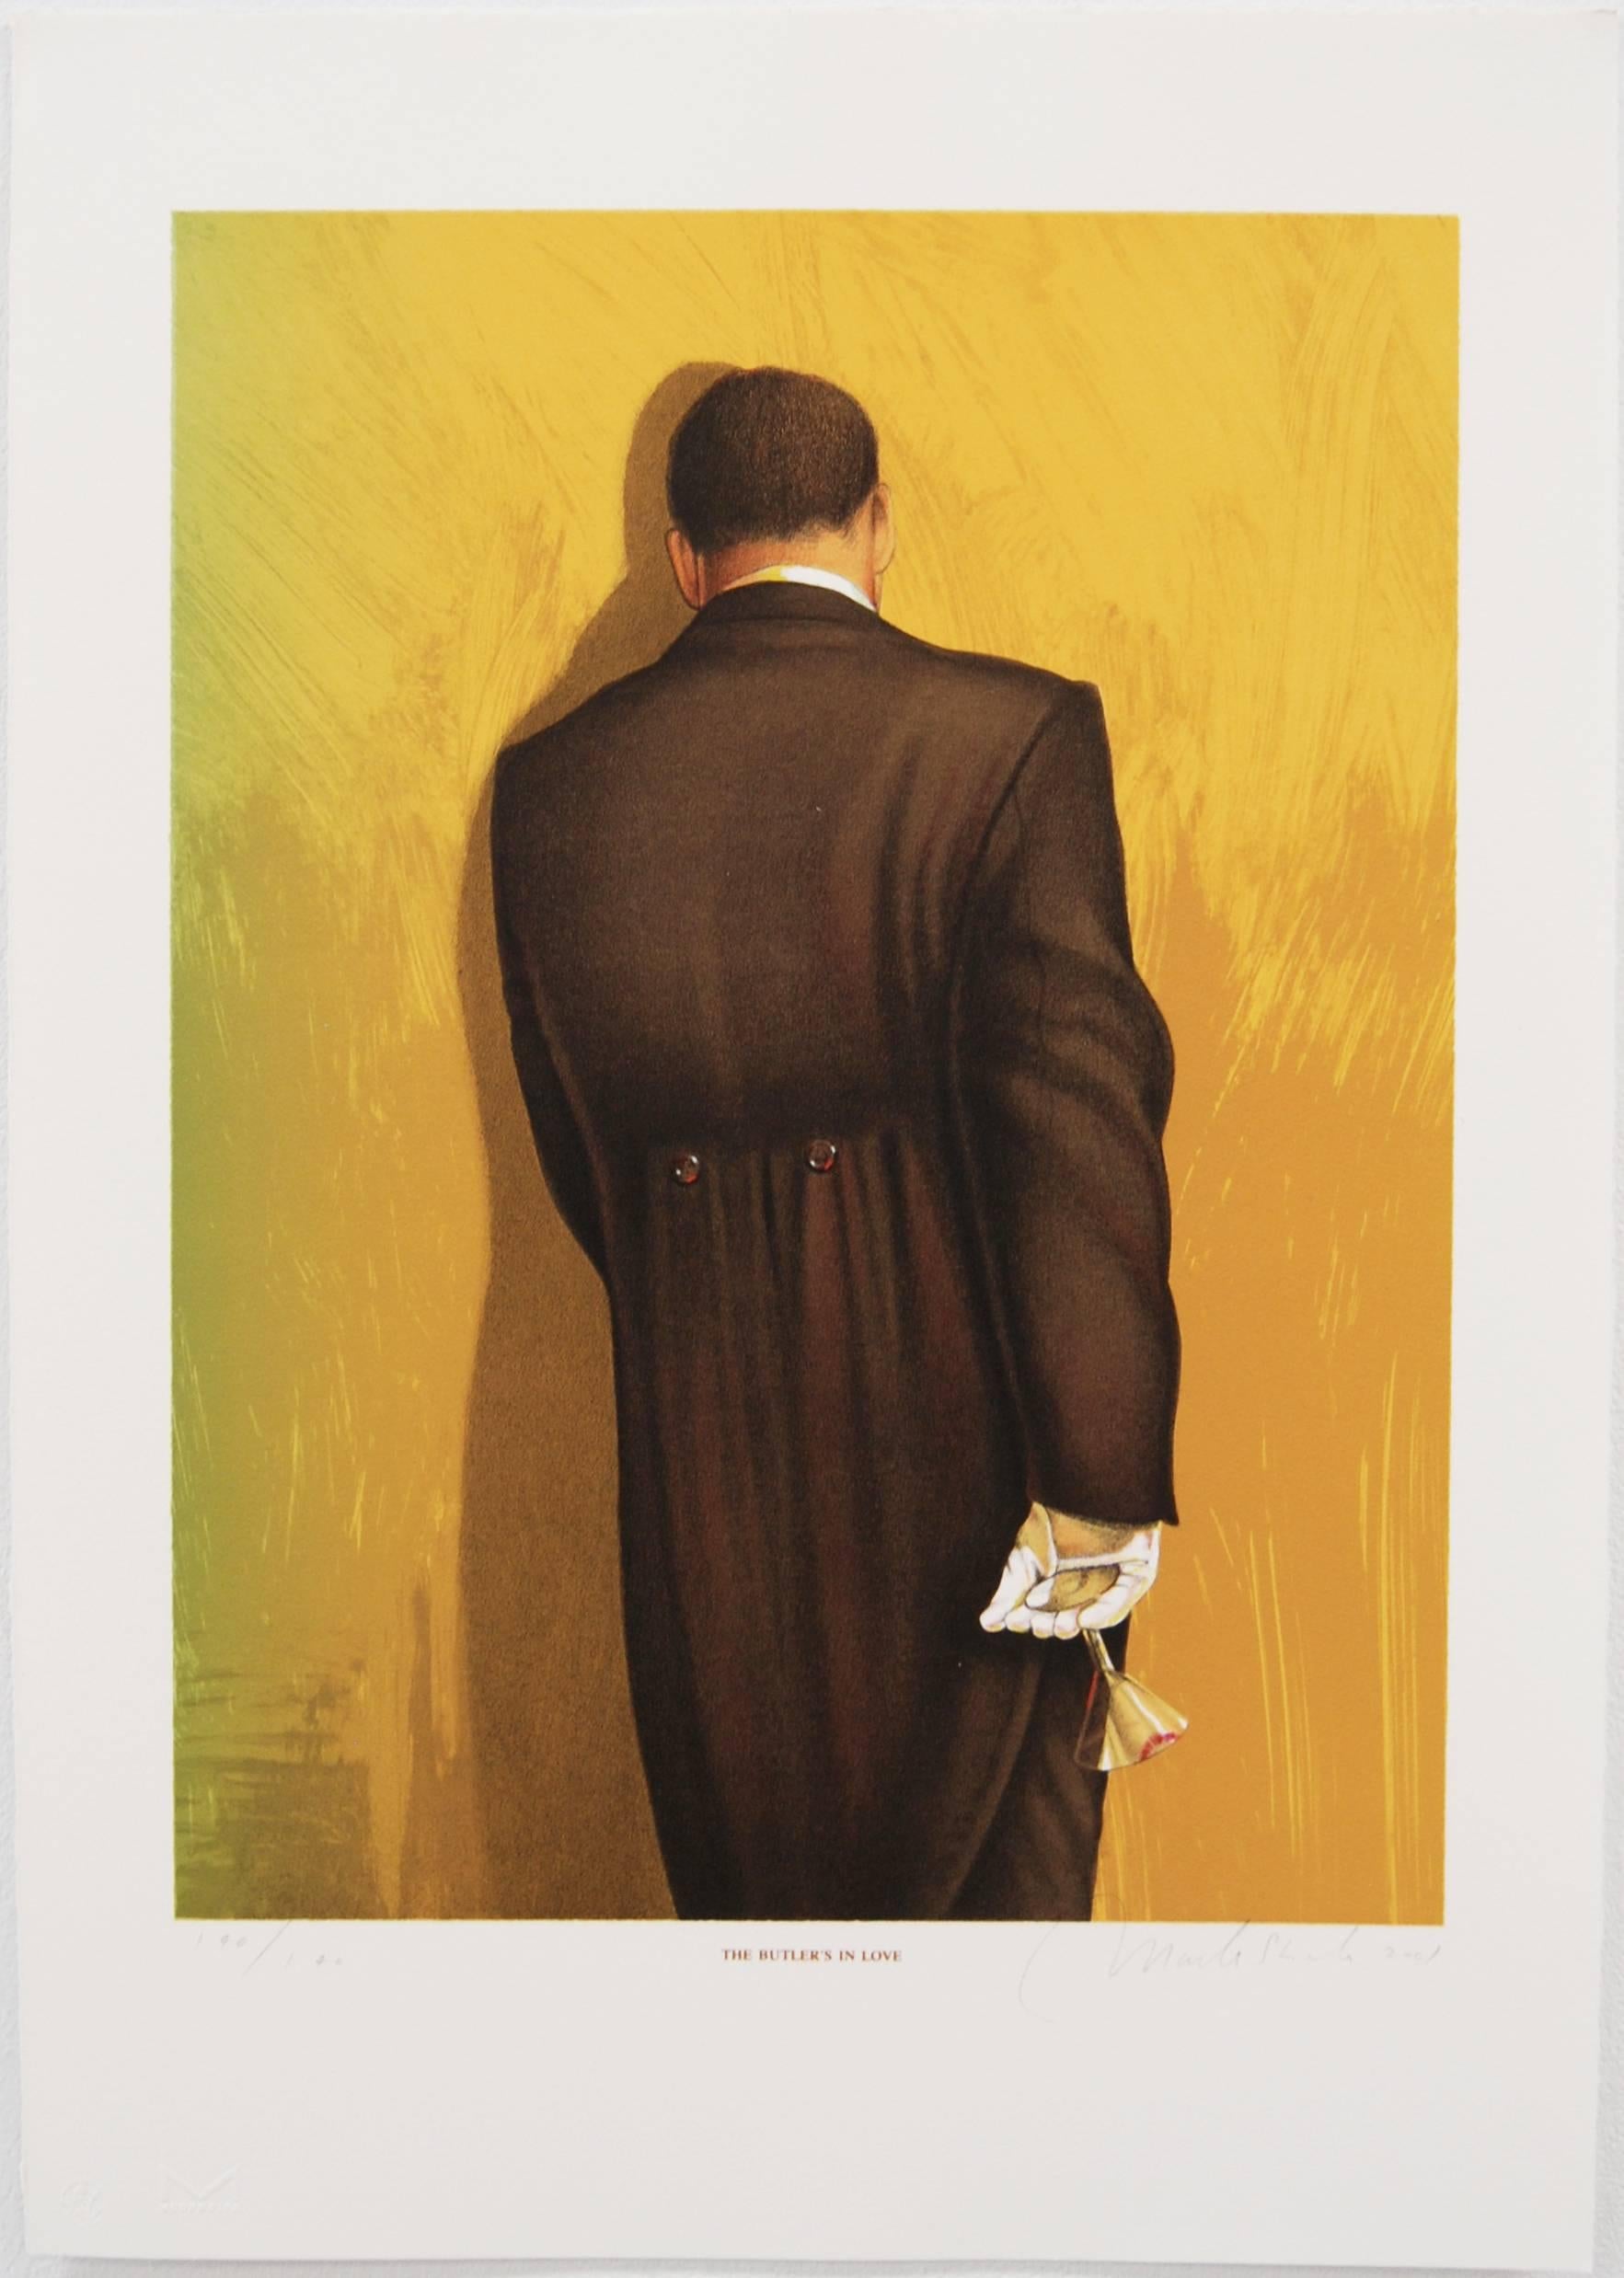 The Butler's in Love, limited edition signed lithograph  - Print by Mark Stock